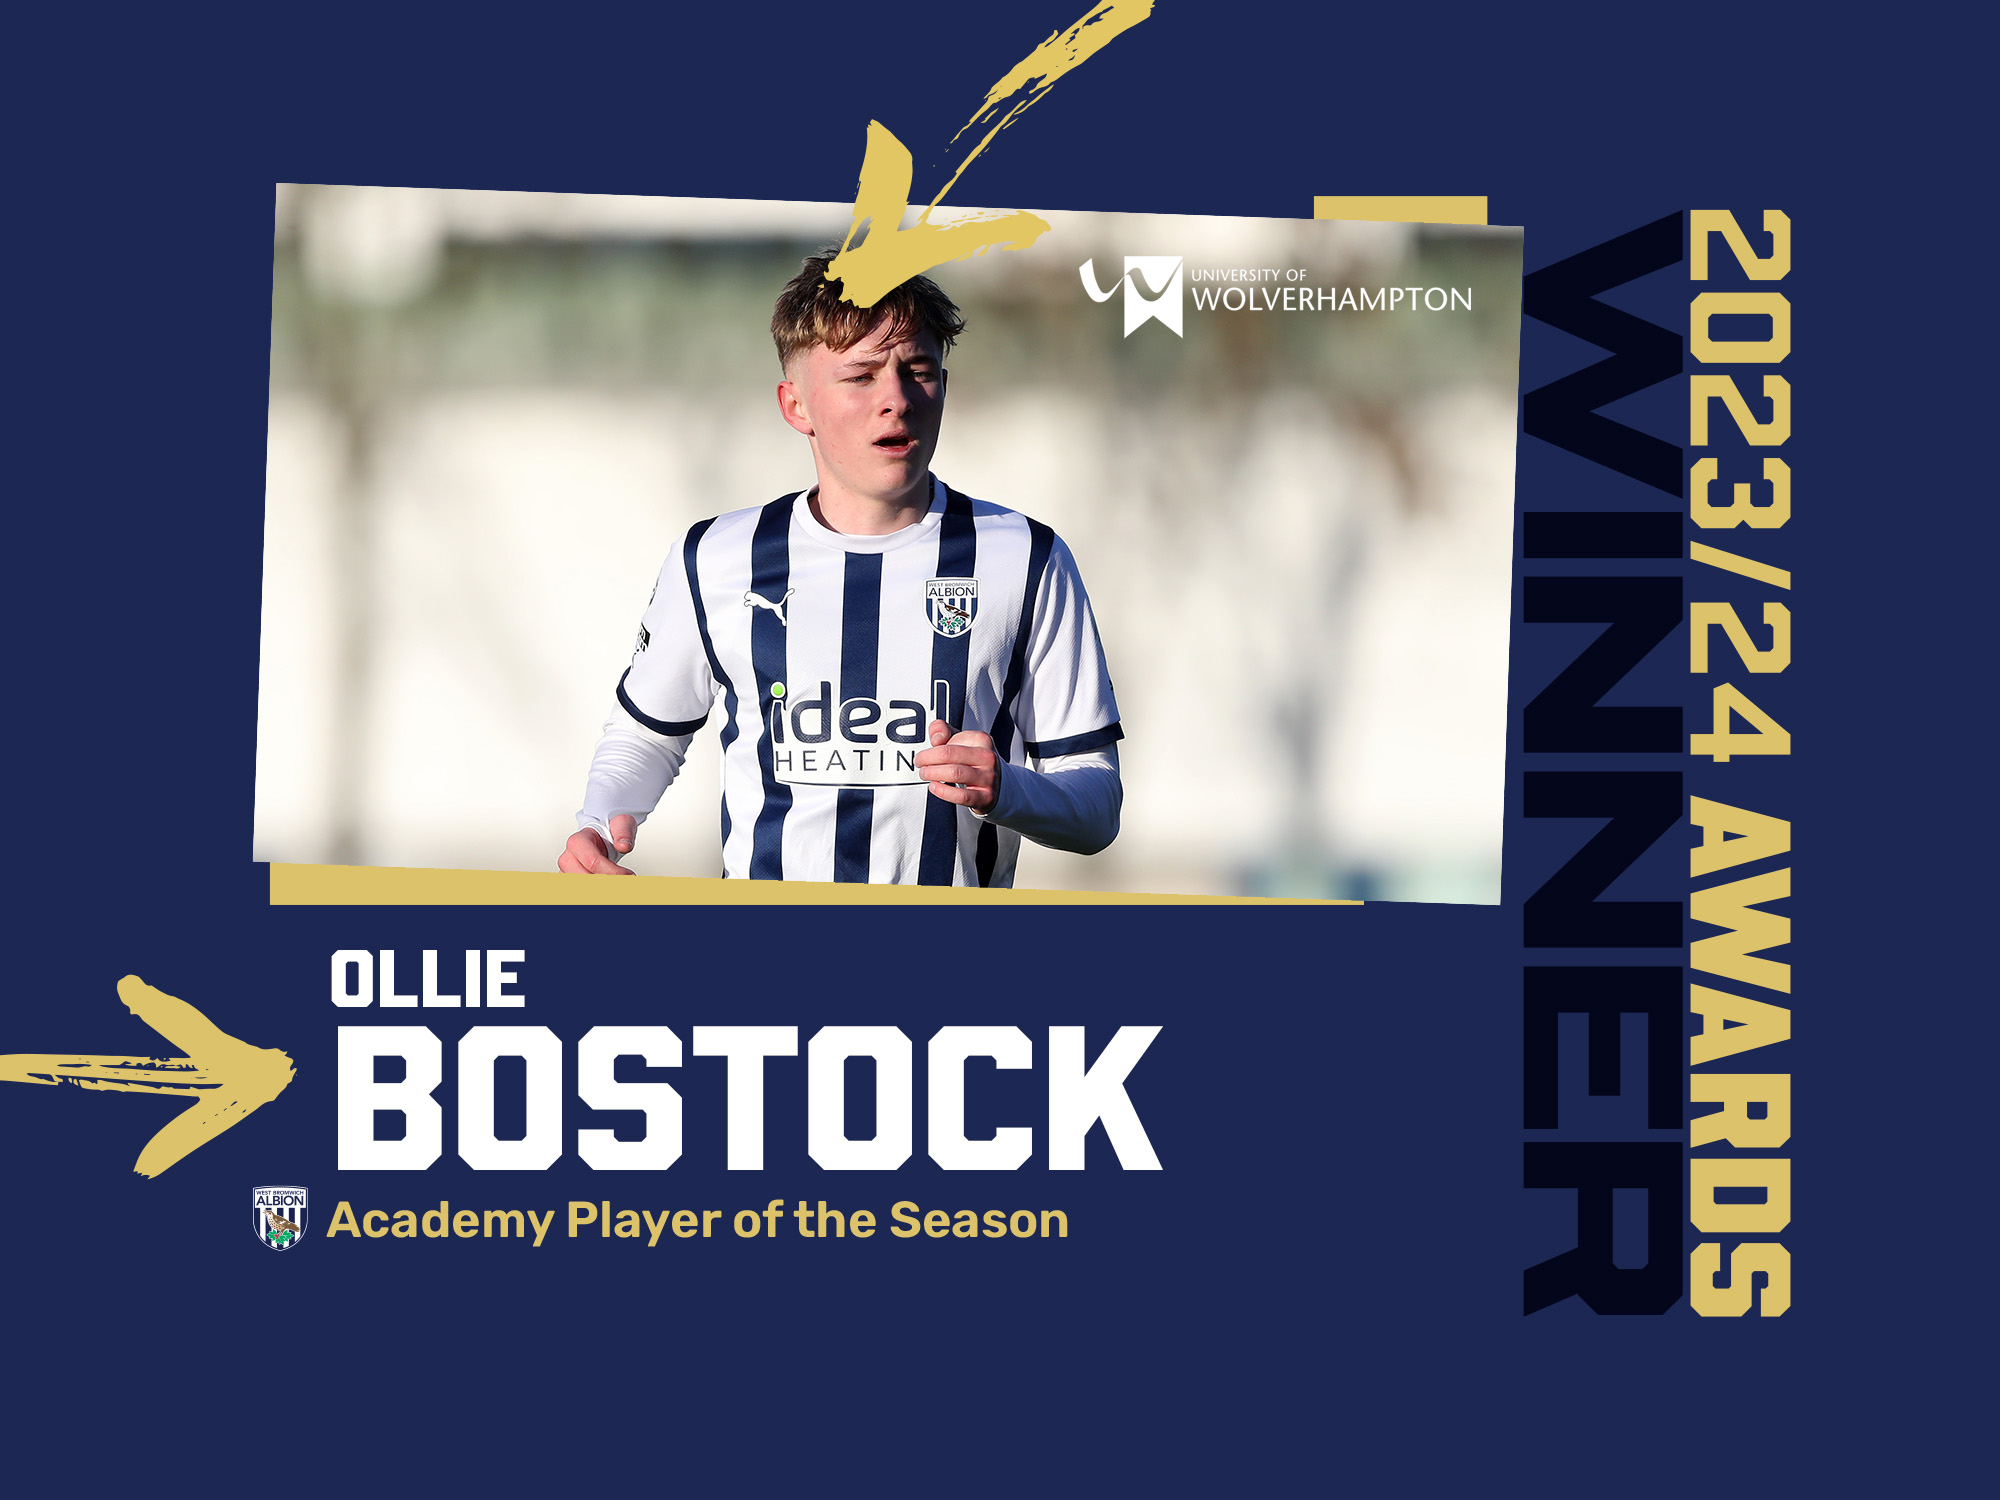 Ollie Bostock's Academy Player of the Season graphic with an image of him playing in the home kit 